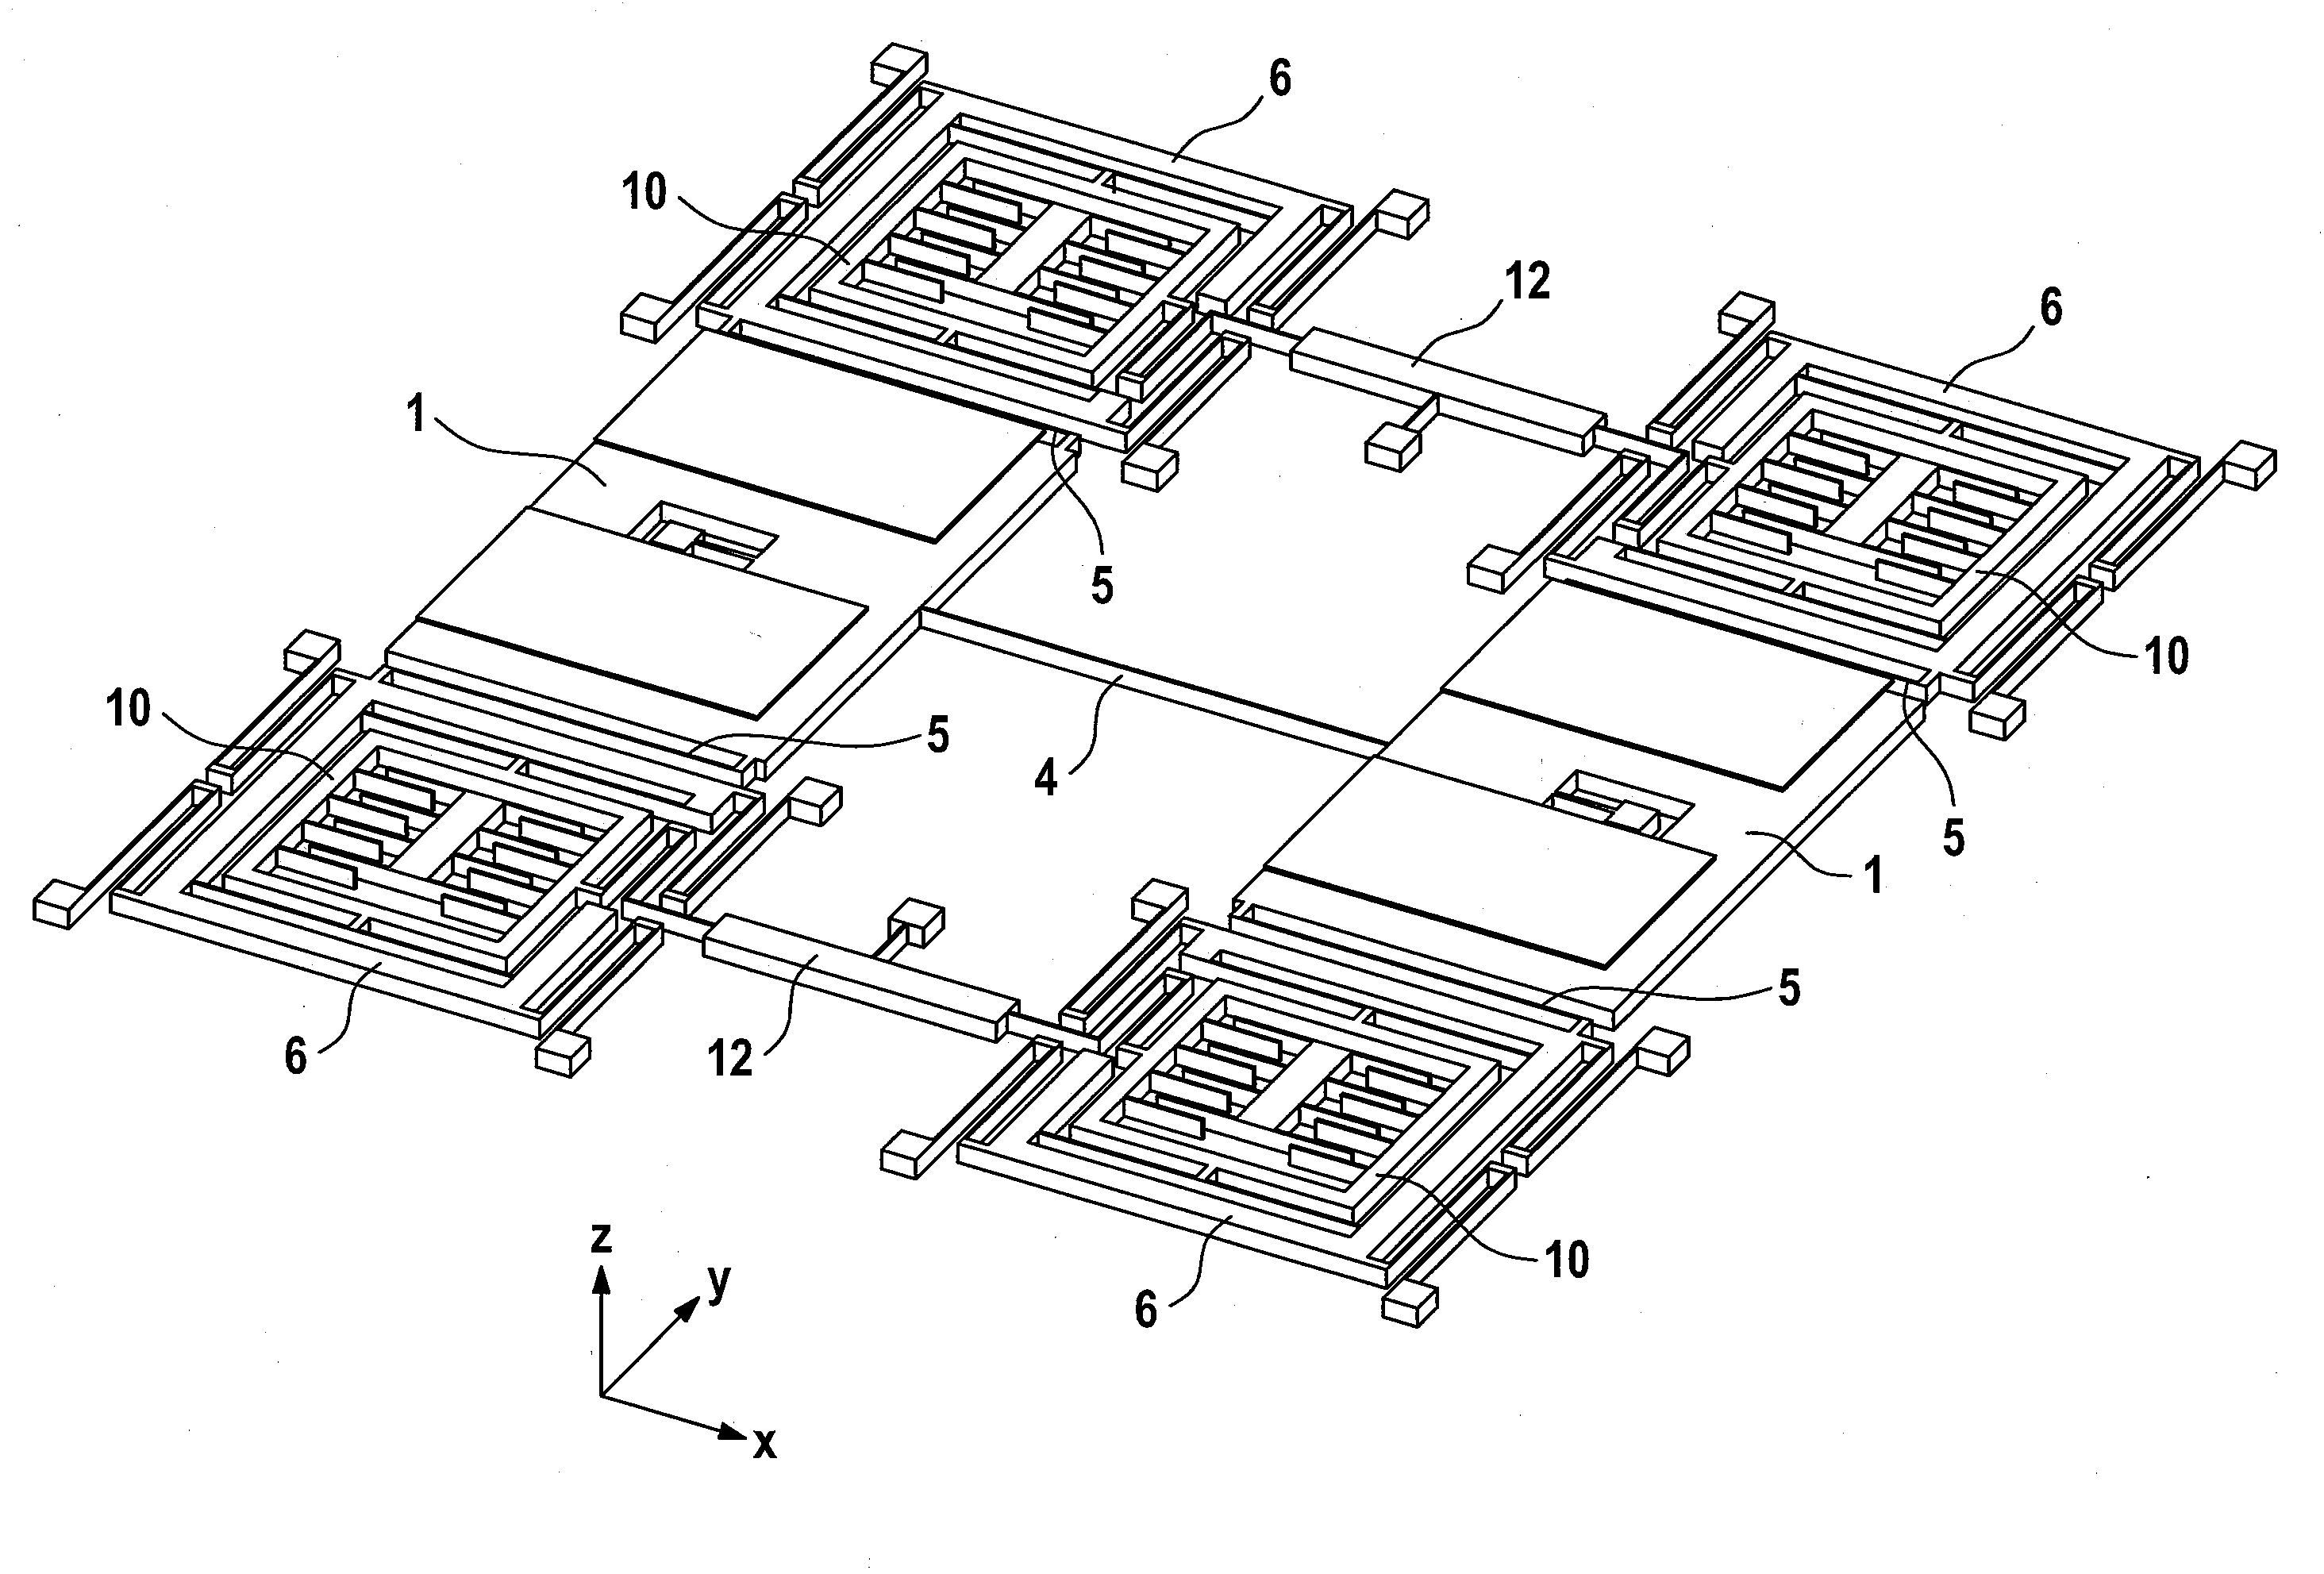 Double-axle, shock-resistant rotation rate sensor with linear and rotary seismic elements